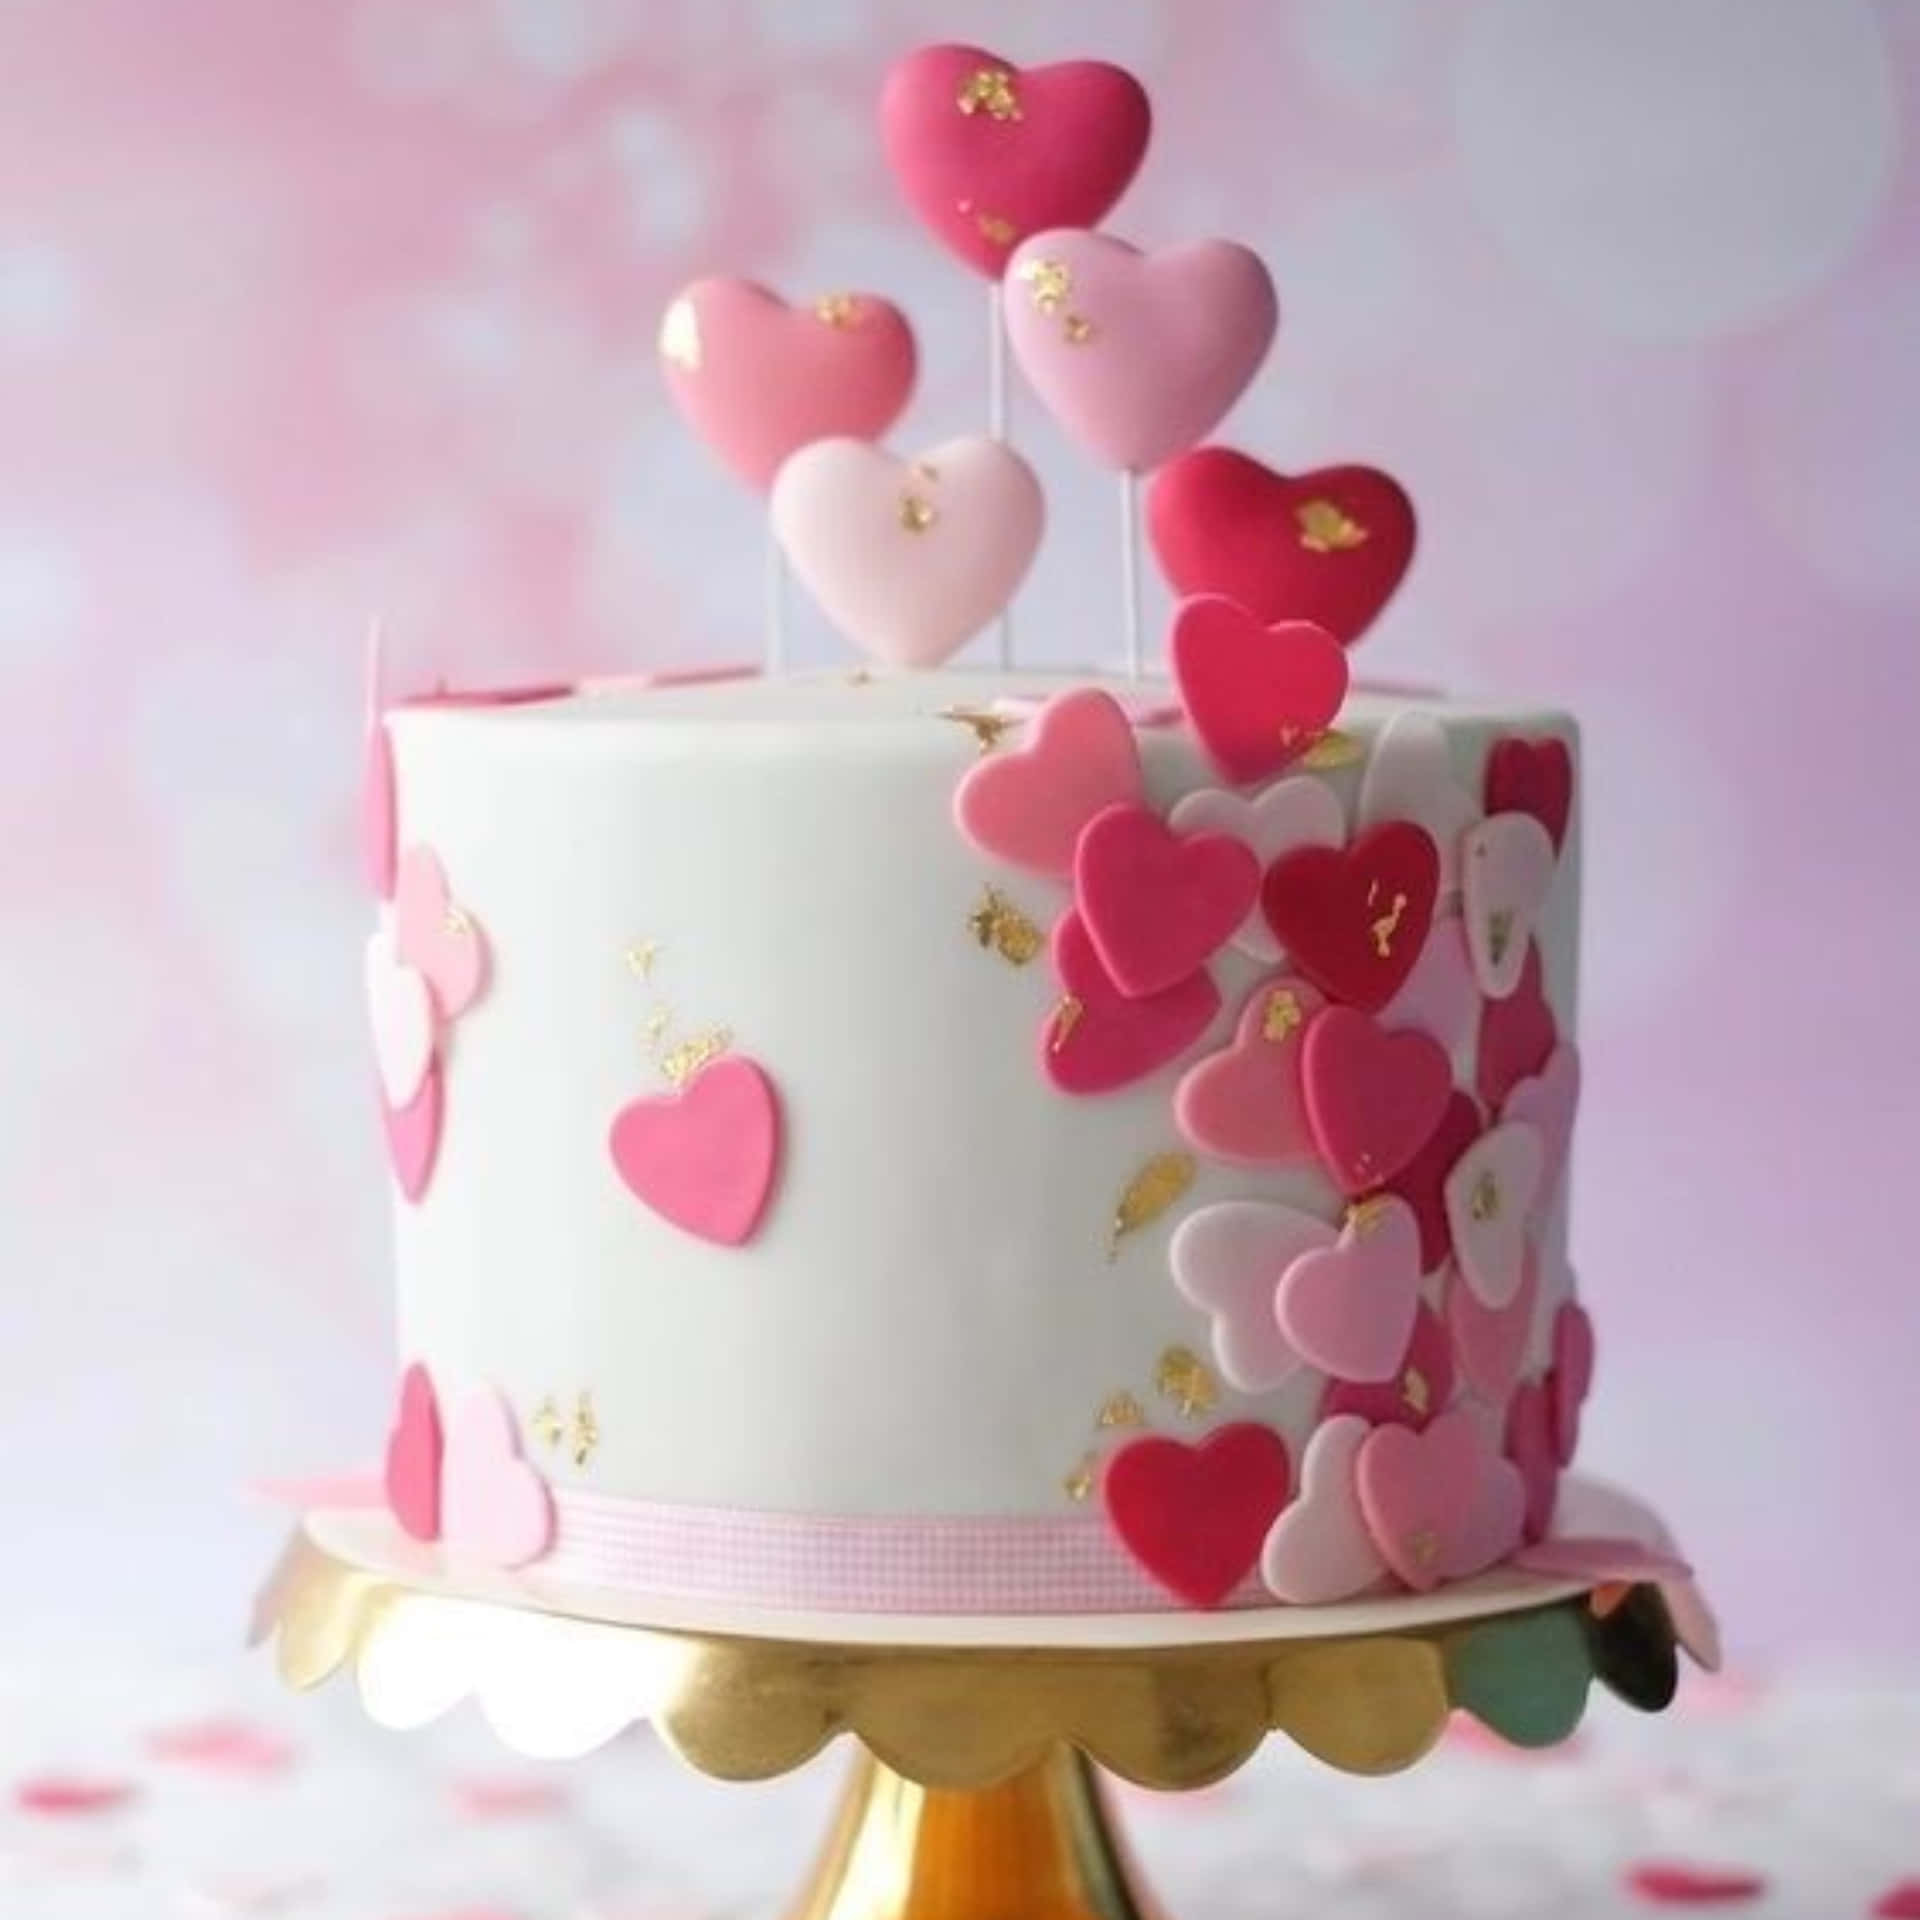 Gorgeous rose-shaped cake fondant decorated with fresh raspberries Wallpaper